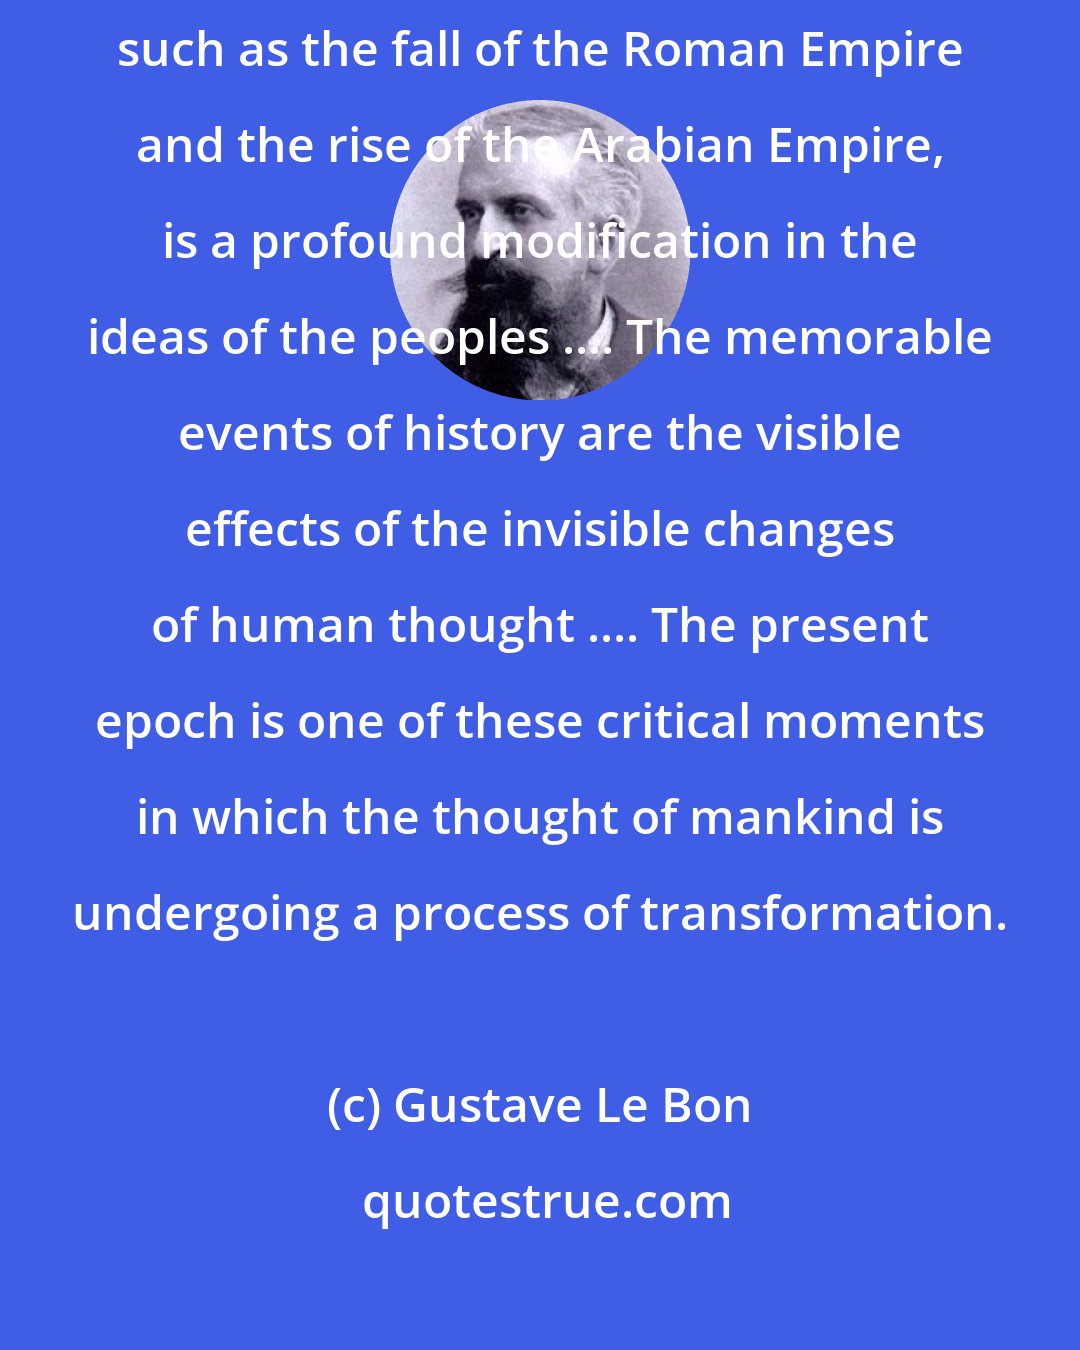 Gustave Le Bon: The real cause of the great upheavals which precede changes of civilisations, such as the fall of the Roman Empire and the rise of the Arabian Empire, is a profound modification in the ideas of the peoples .... The memorable events of history are the visible effects of the invisible changes of human thought .... The present epoch is one of these critical moments in which the thought of mankind is undergoing a process of transformation.